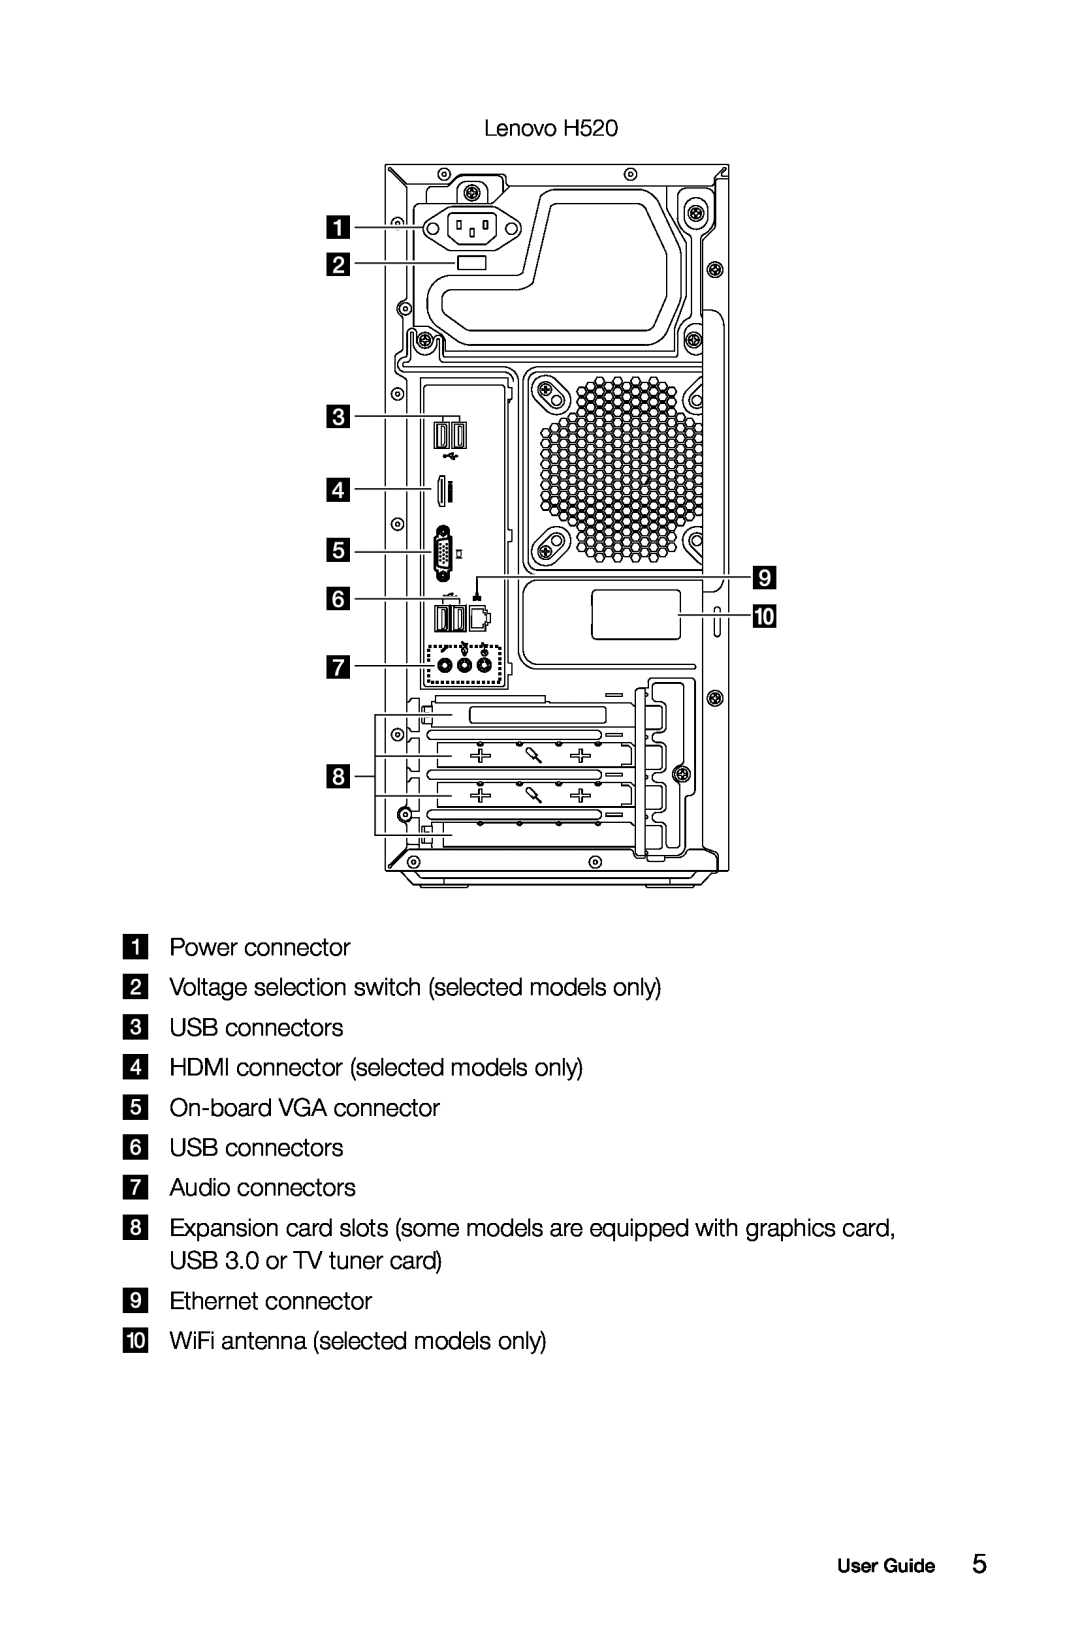 Lenovo 57321302 Power connector, Voltage selection switch selected models only USB connectors, Lenovo H520, User Guide 